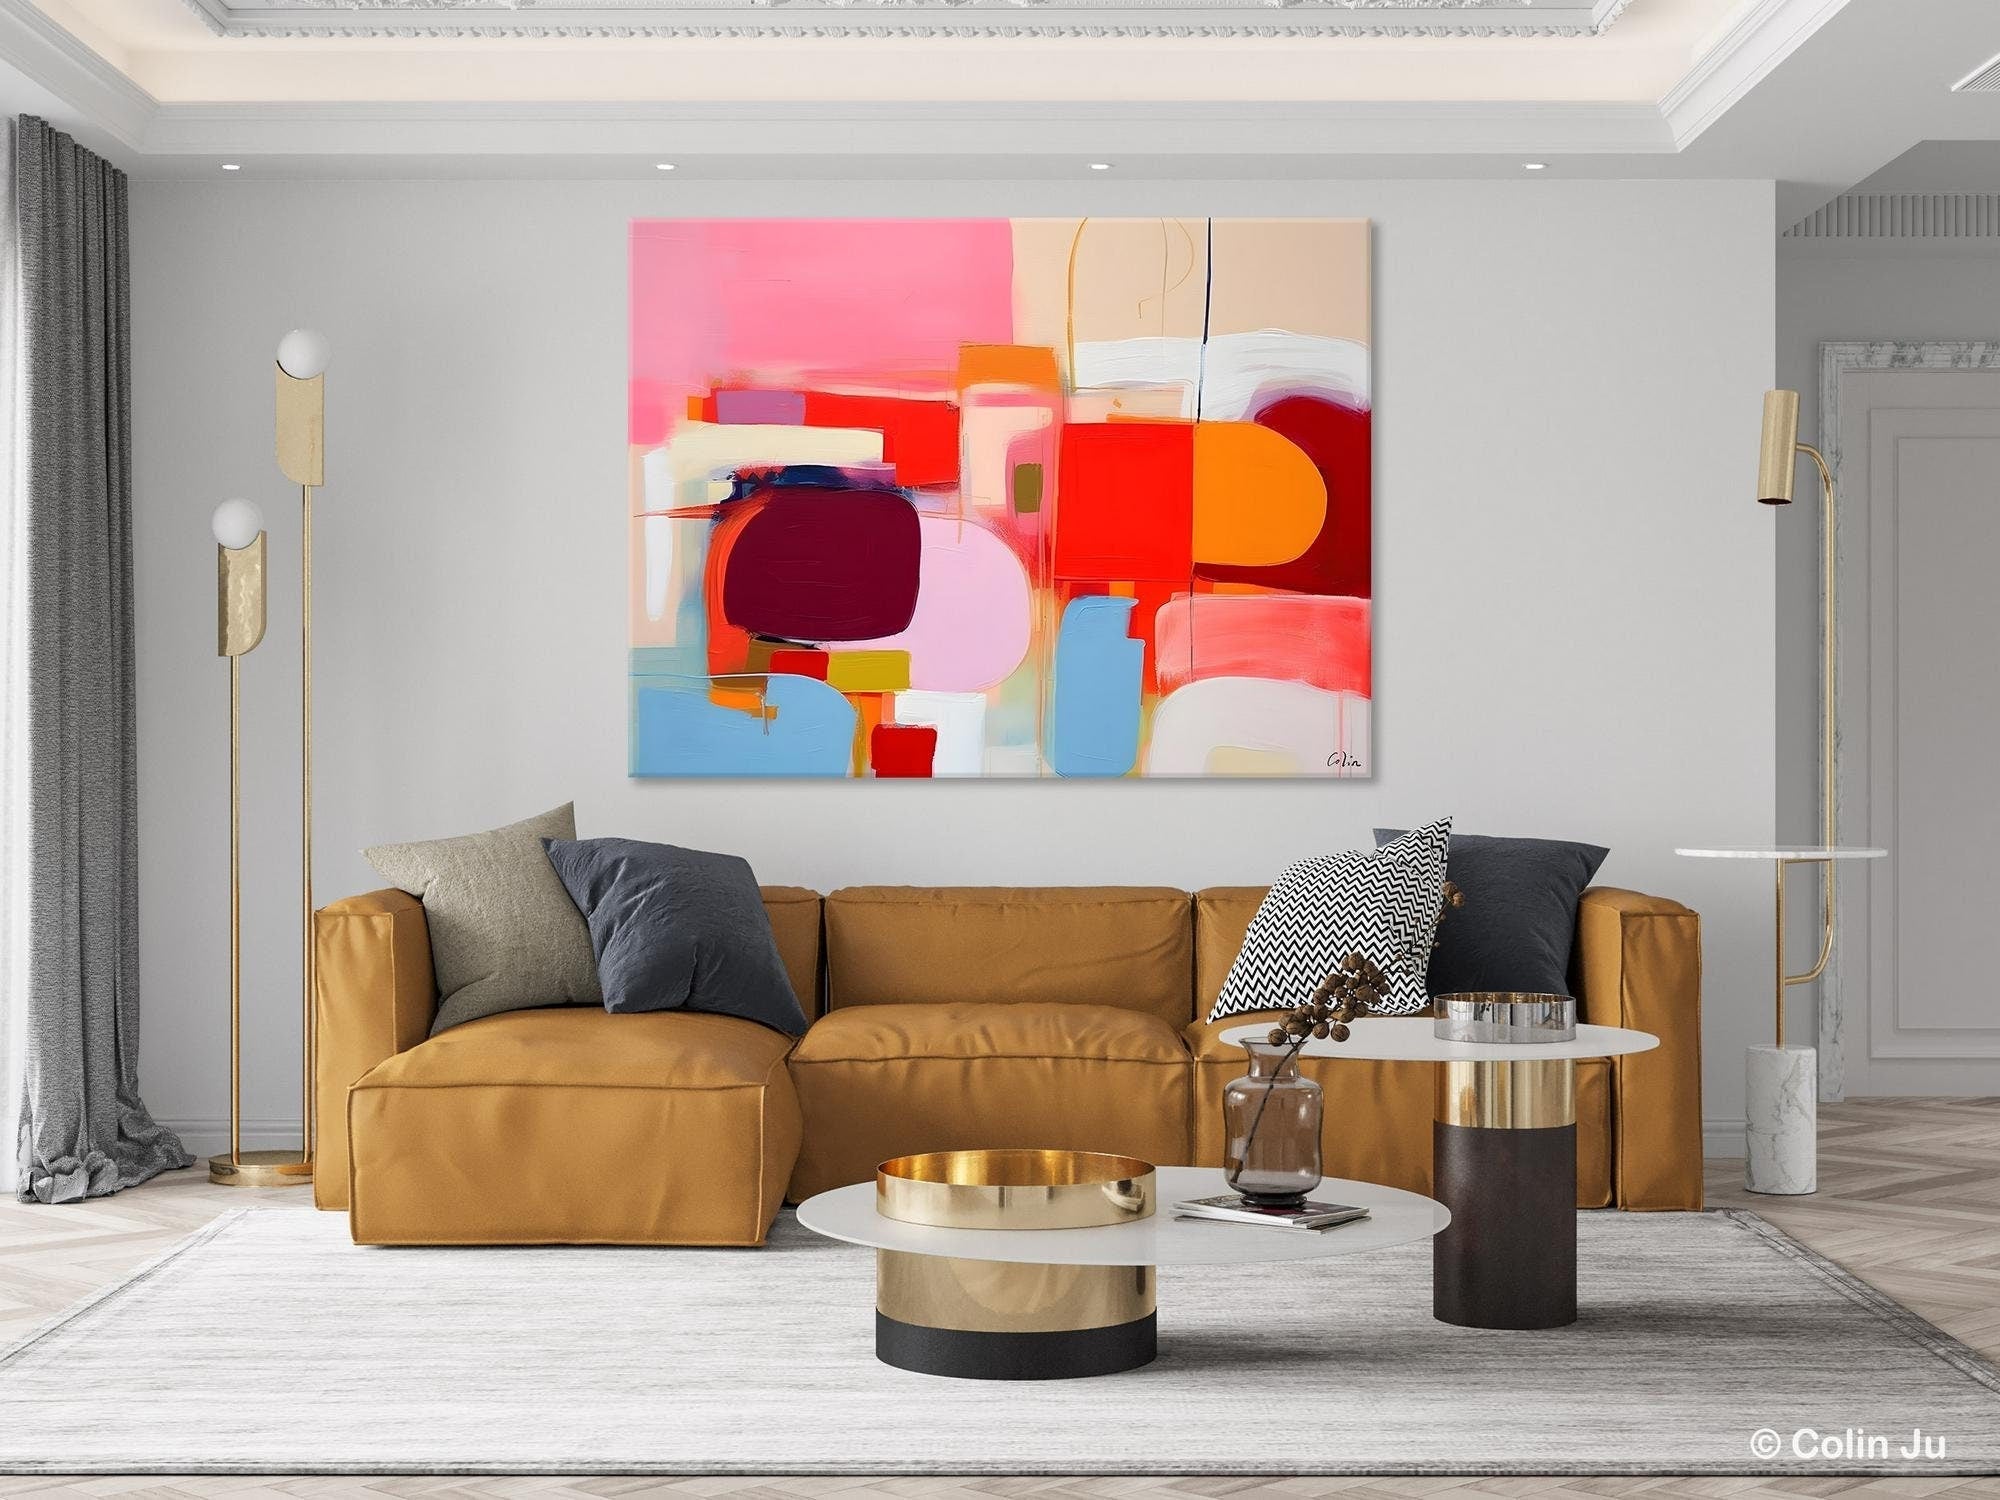 Extra Large Canvas Paintings, Original Abstract Art, Modern Wall Art Ideas for Dining Room, Impasto Painting, Contemporary Acrylic Paintings-LargePaintingArt.com